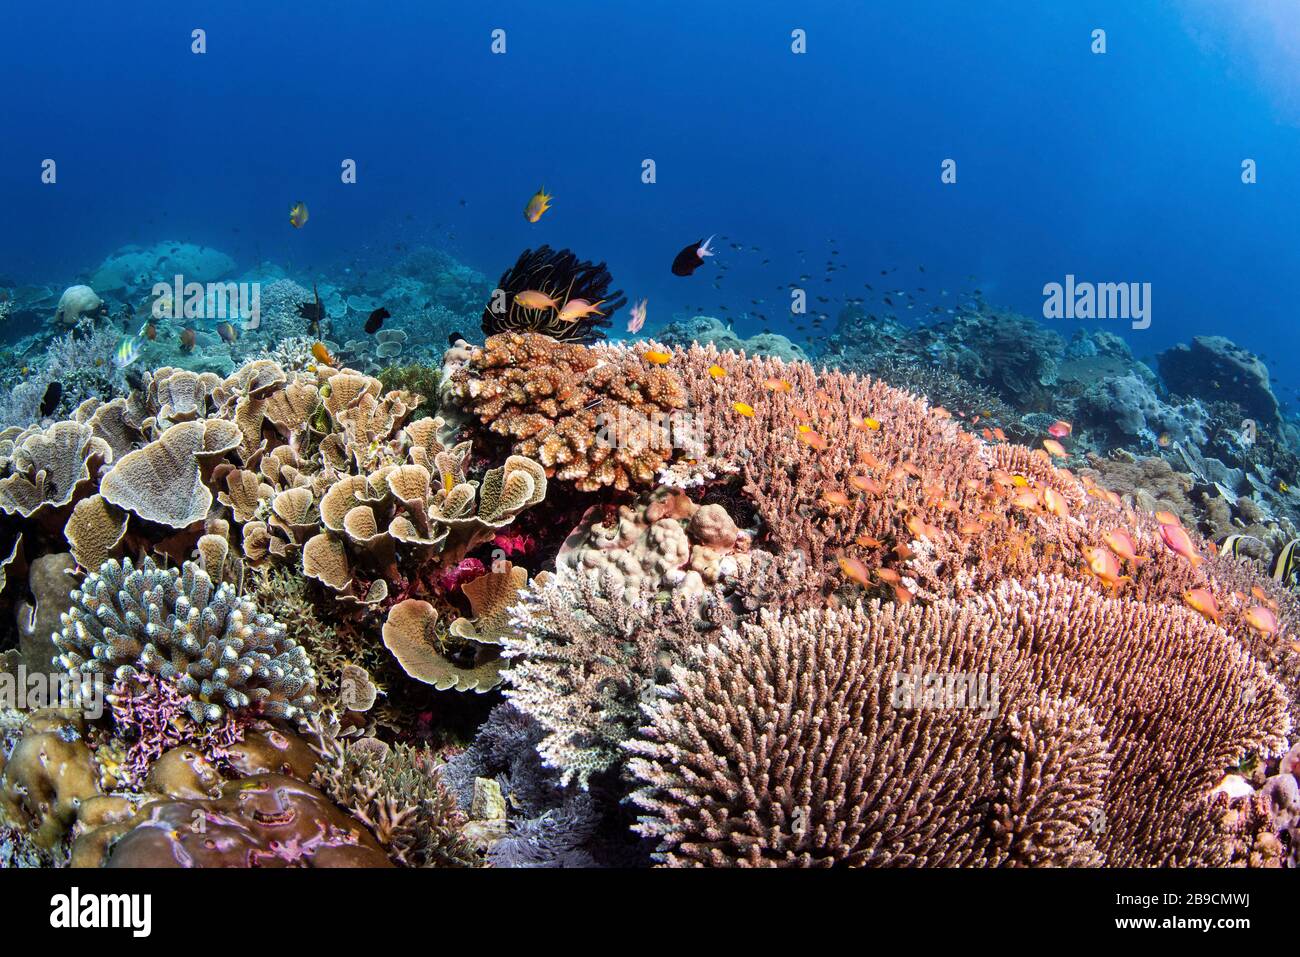 A beautiful hard coral reef supports a healthy ecosystem. Stock Photo